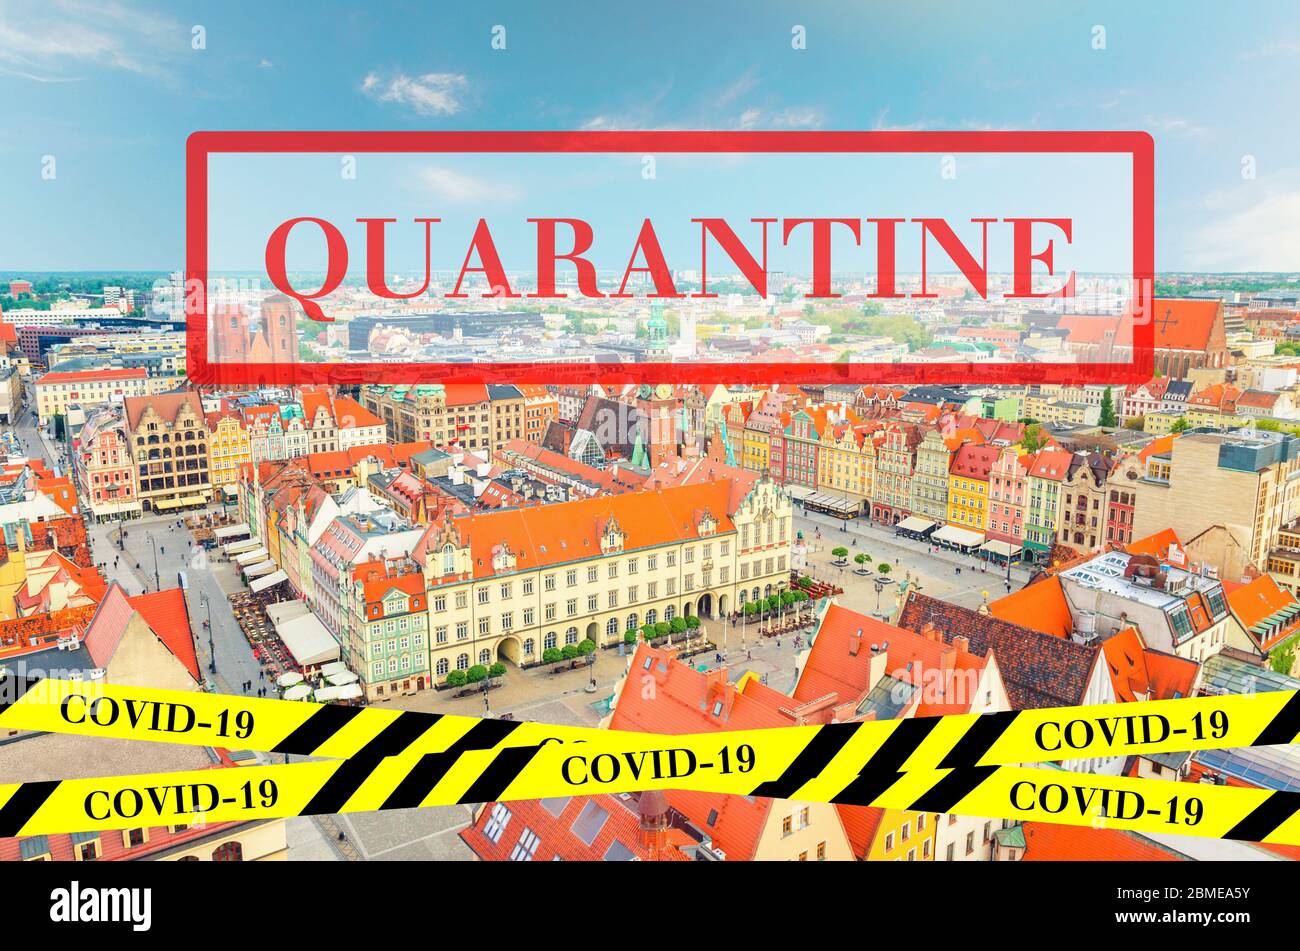 Quarantine in Poland. Top aerial panoramic view of Wroclaw old town. No travel and lockdown concept. Coronavirus outbreak Covid-19 pandemic concept. Canceled tourist vacation. Barrier tape. Stock Photo